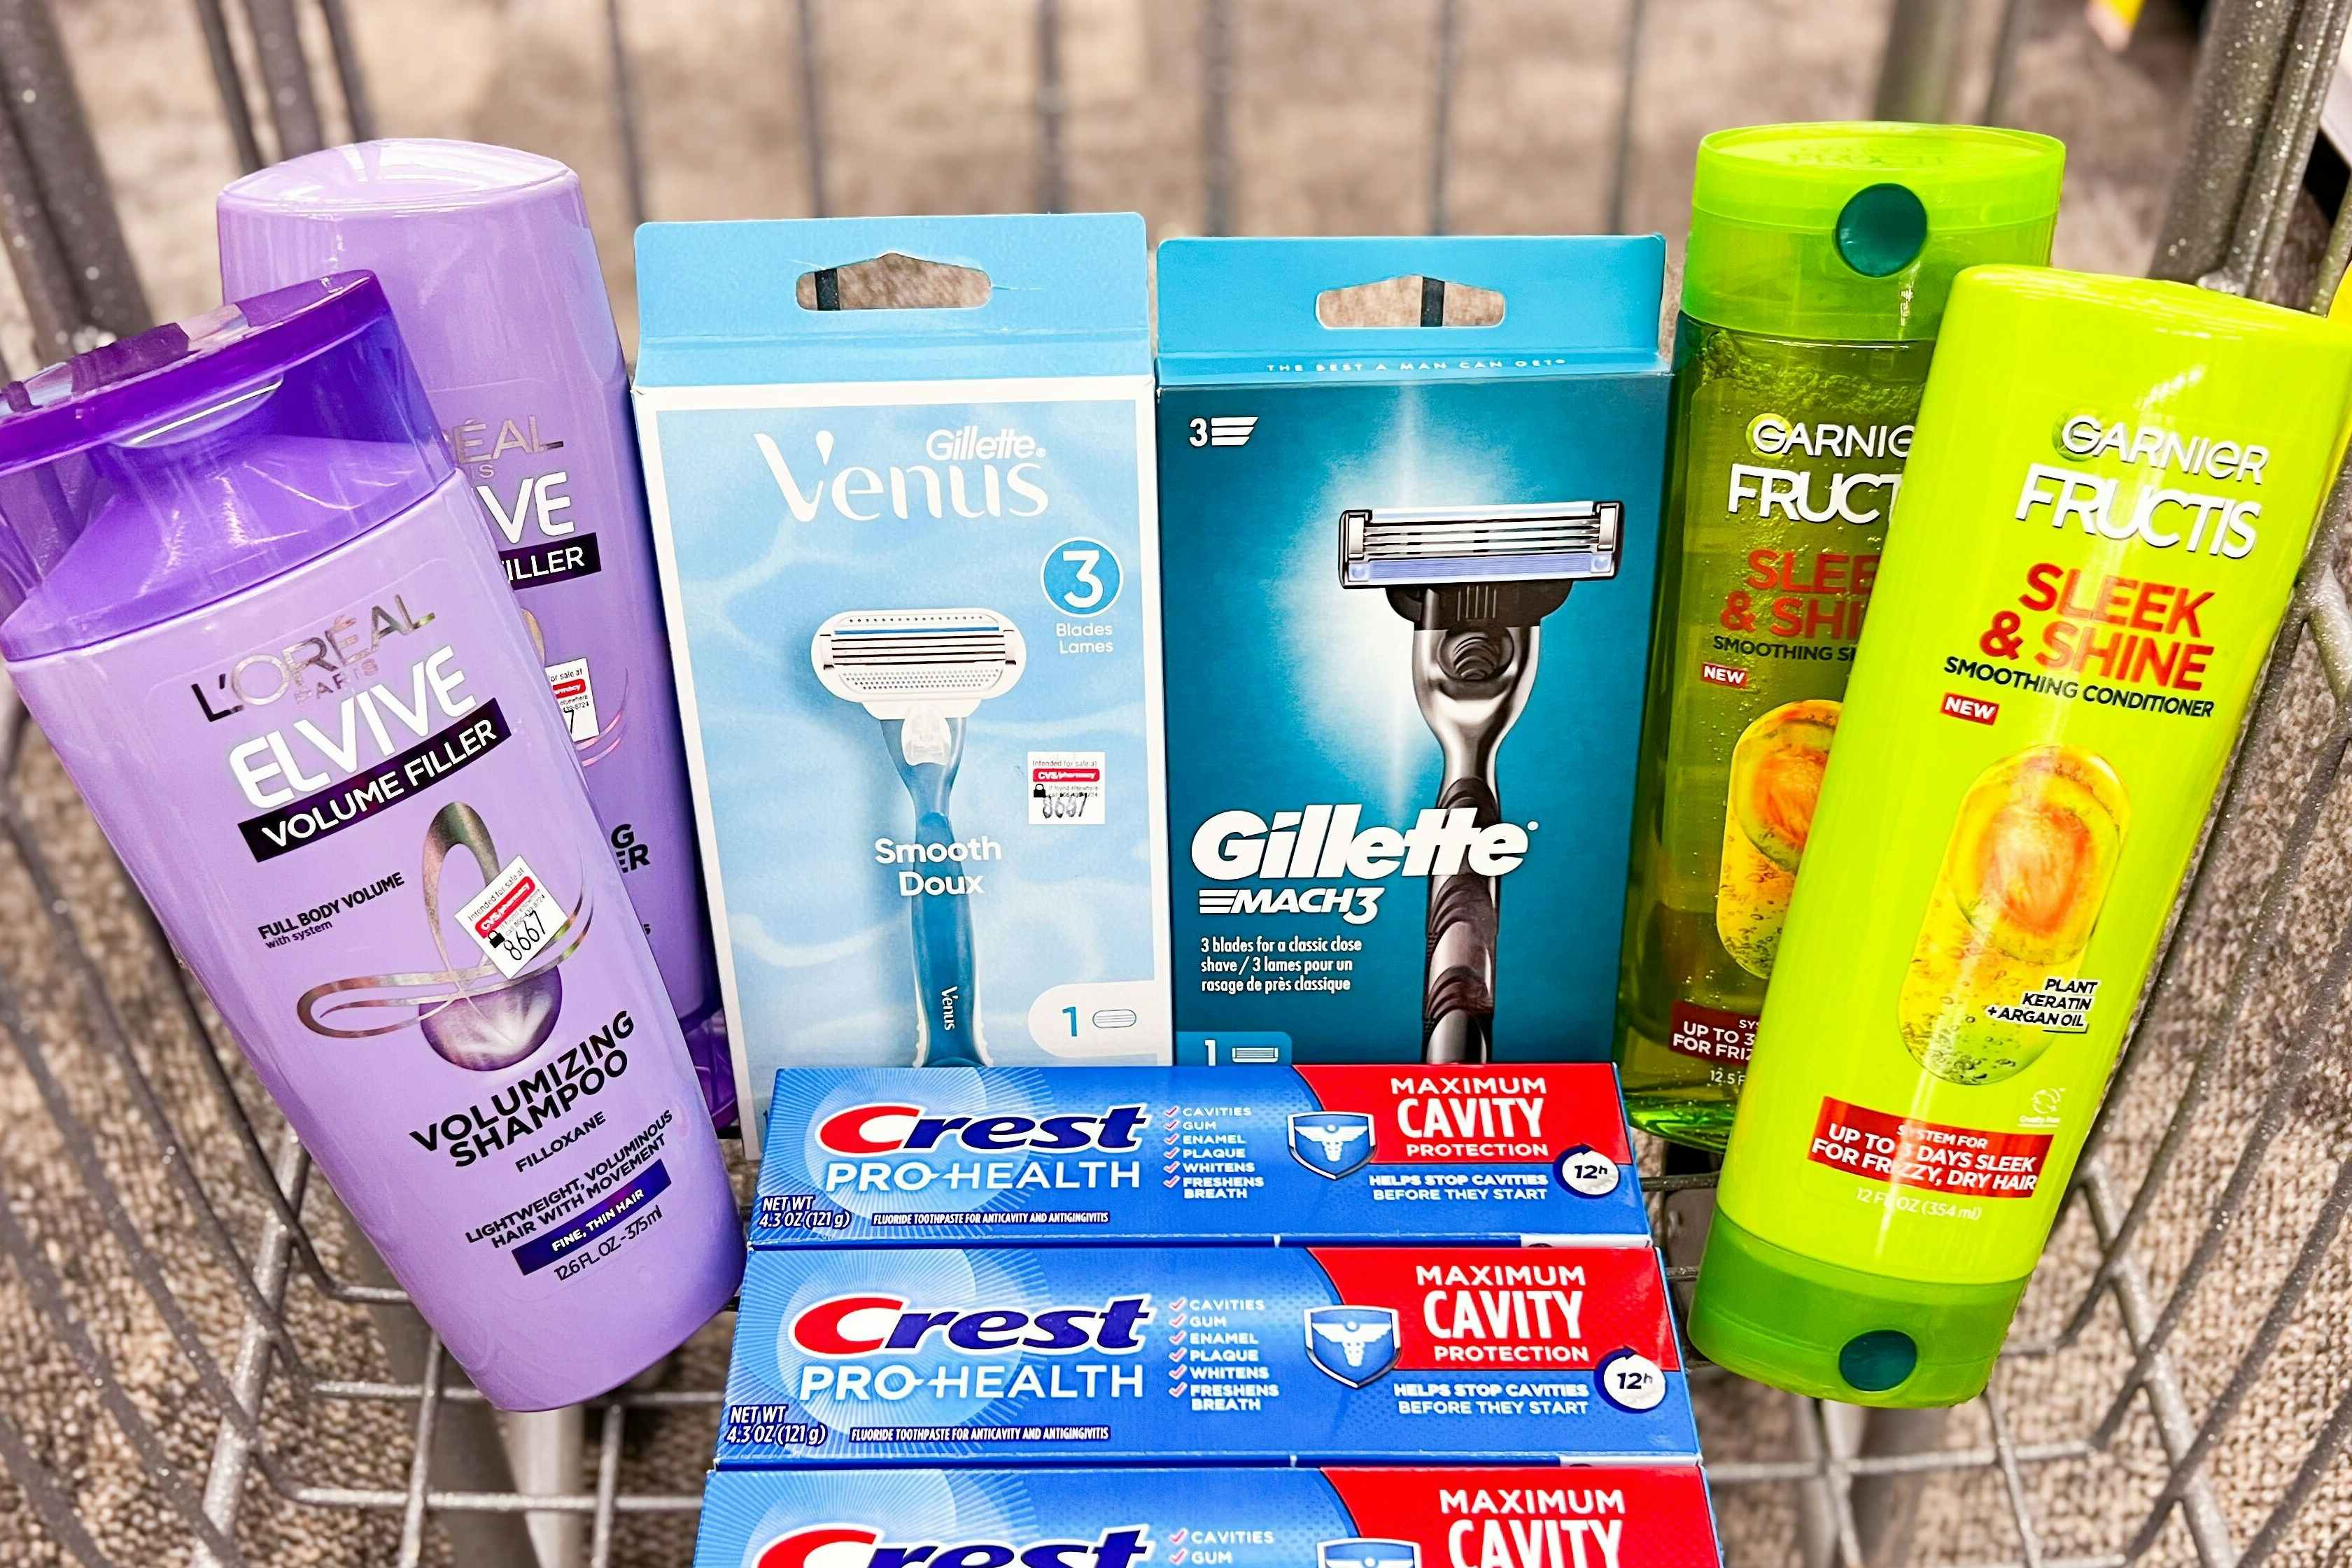 Sneak Peek for Next Week: The Hottest Drugstore Deals Starting May 12